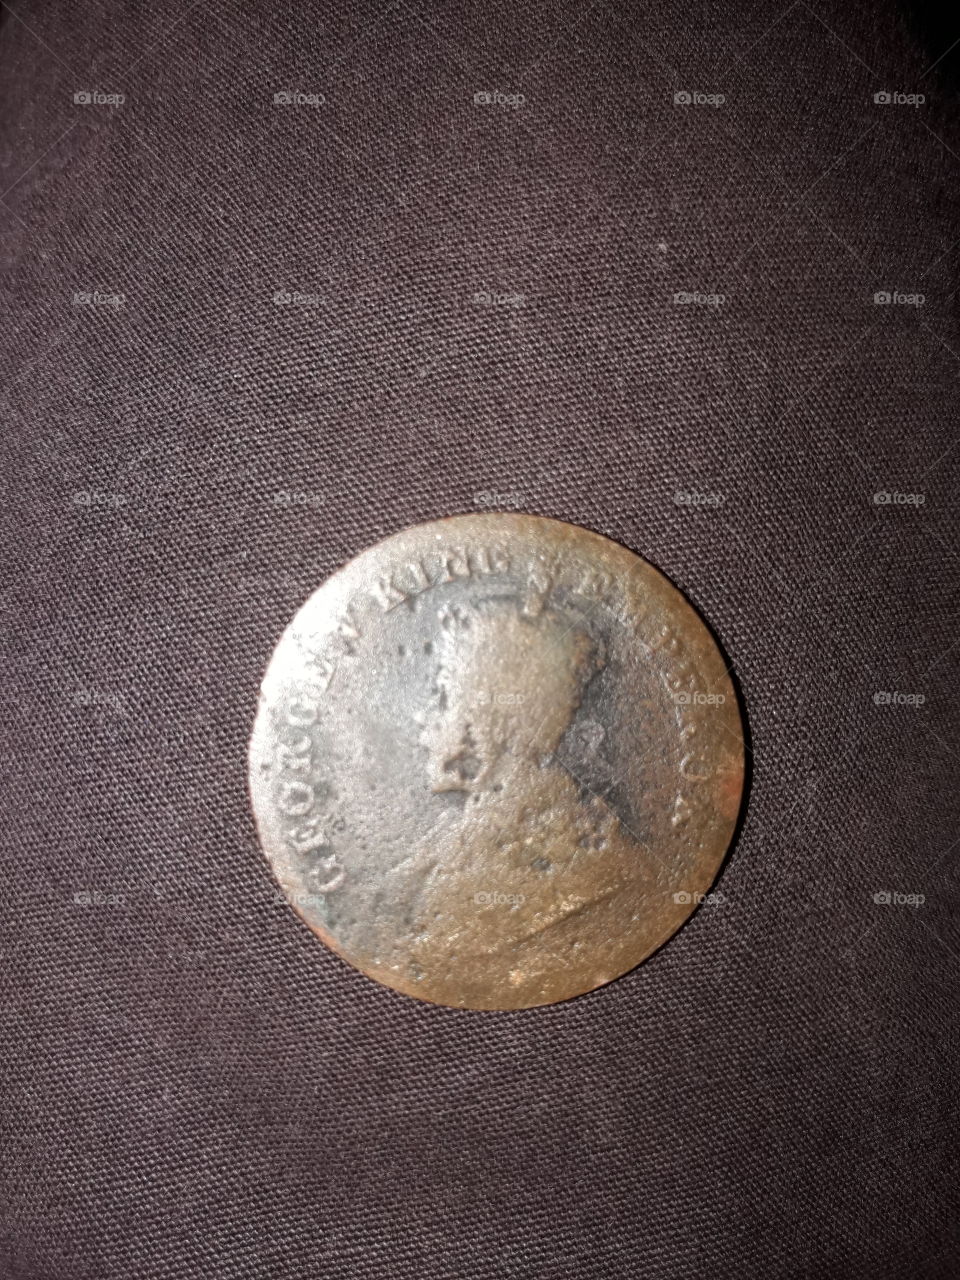 This  coin is veri old, it is 100years old, this coin is launching, 1917, geroge v king emperar, india and brietish kingGeorge V (George Frederick Ernest Albert; 3 June 1865 – 20 January 1936) was King of the United Kingdom and the British Dominions, and Emperor of India, from 6 May 1910 until his death in 1936.

He was the second son of the Prince and Princess of Wales (later King Edward VII and Queen Alexandra), and grandson of the then reigning British monarch, Queen Victoria. From the time of his birth, he was third in the line of succession behind his father and his own elder brother, Prince Albert Victor. From 1877 to 1891, George served in the Royal Navy, until the unexpected death of his elder brother in early 1892 put him directly in line for the throne. On the death of his grandmother in 1901, George's father became King-Emperor of the British Empire, and George was created Prince of Wales. He succeeded his father in 1910. He was the only Emperor of India to be present at his own Delhi Durbar.

His reign saw the rise of socialism, communism, fascism, Irish republicanism, and the Indian independence movement, all of which radically changed the political landscape. The Parliament Act 1911 established the supremacy of the elected British House of Commons over the unelected House of Lords. As a result of the First World War (1914–1918), the empires of his first cousins Tsar Nicholas II of Russia and Kaiser Wilhelm II of Germany fell, while the British Empire expanded to its greatest effective extent. In 1917, George became the first monarch of the House of Windsor, which he renamed from the House of Saxe-Coburg and Gotha as a result of anti-German public sentiment. In 1924 he appointed the first Labourministry and in 1931 the Statute of Westminster recognised the dominions of the Empire as separate, independent states within the Commonwealth of Nations. He had smoking-related health problems throughout much of his later reign and at his death was succeeded